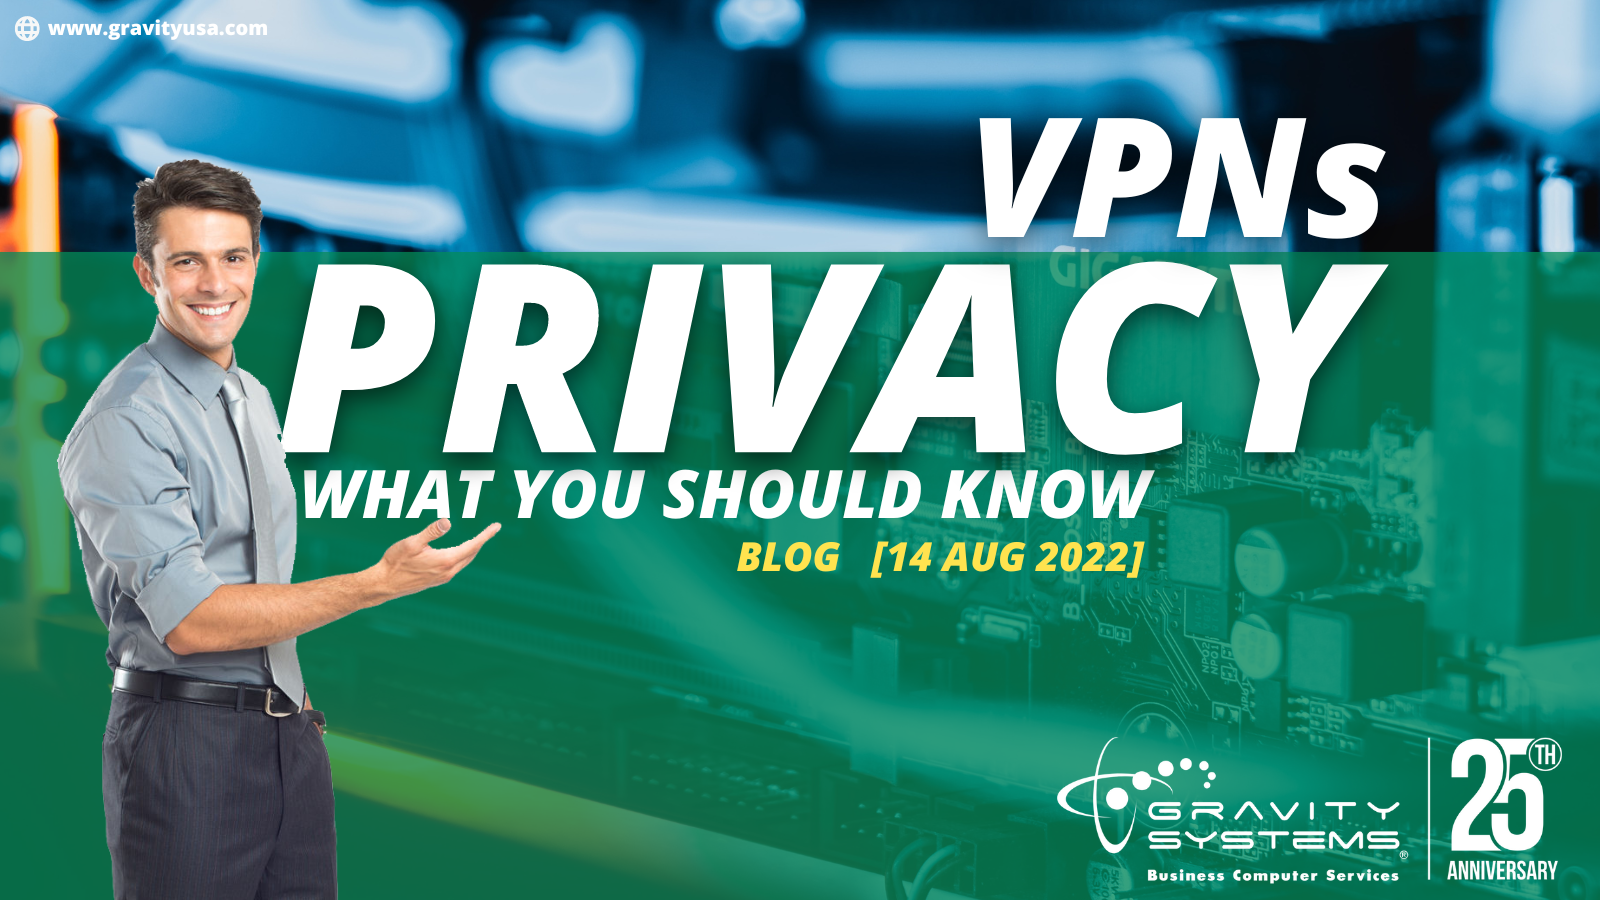 VPNs and Privacy